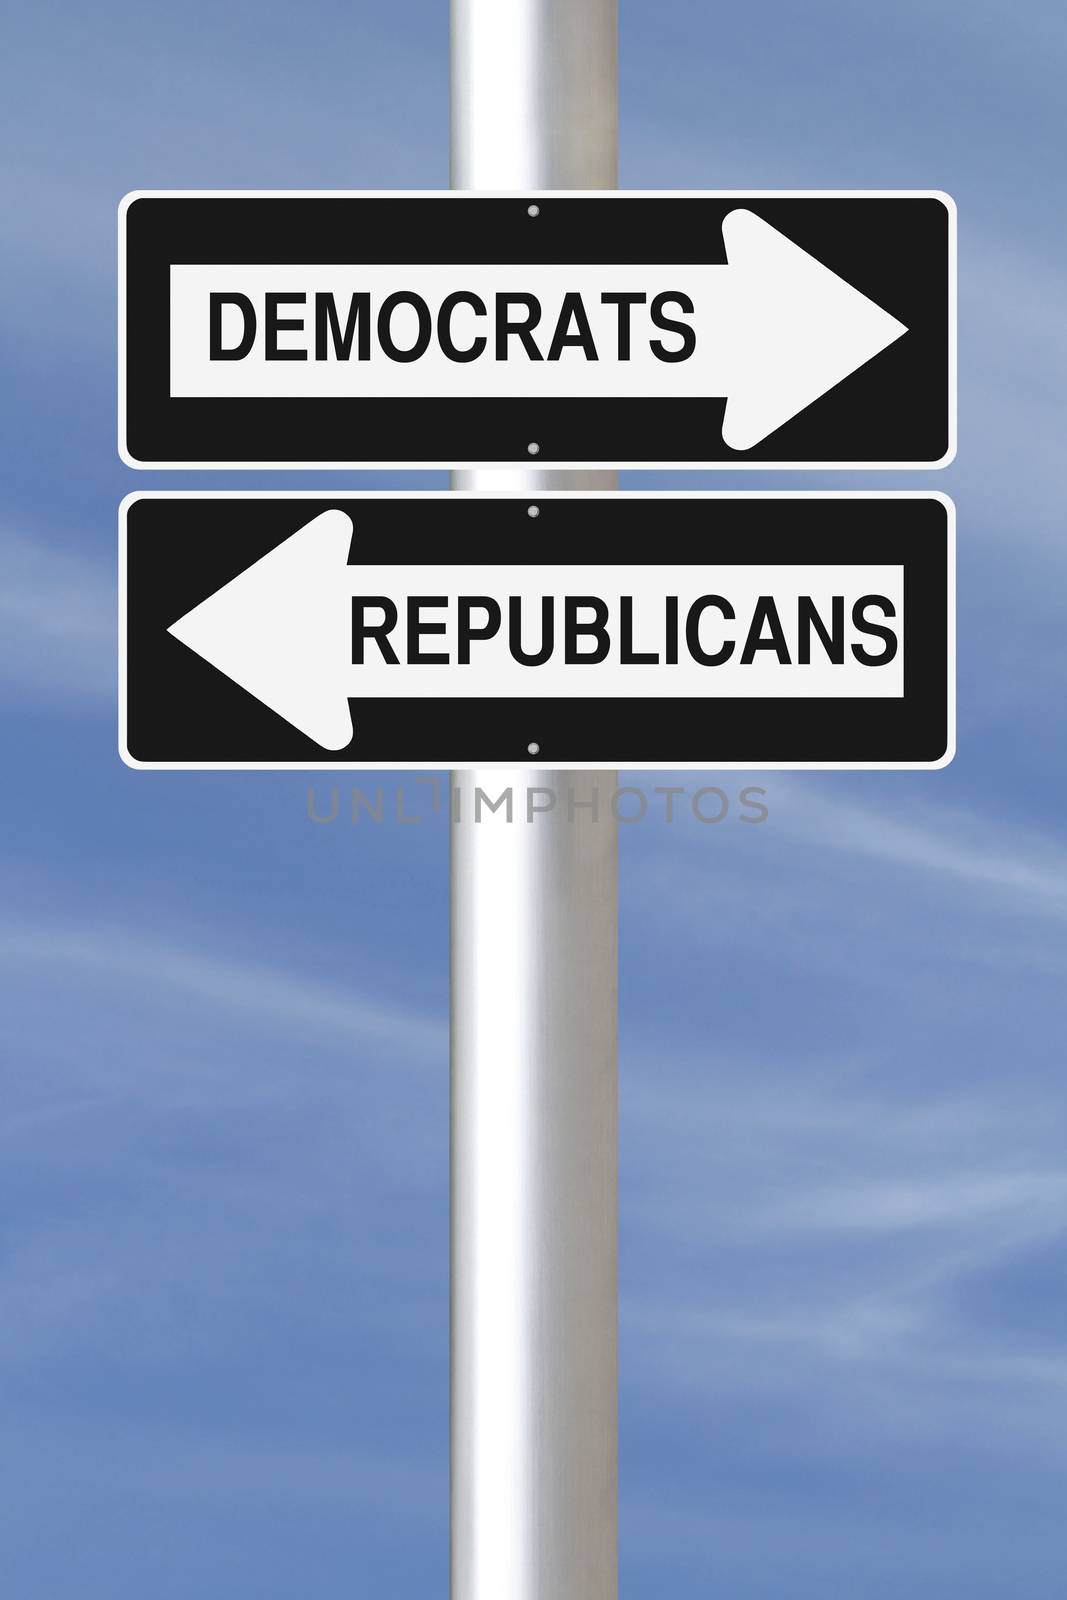 Conceptual one way road signs on American political affiliations